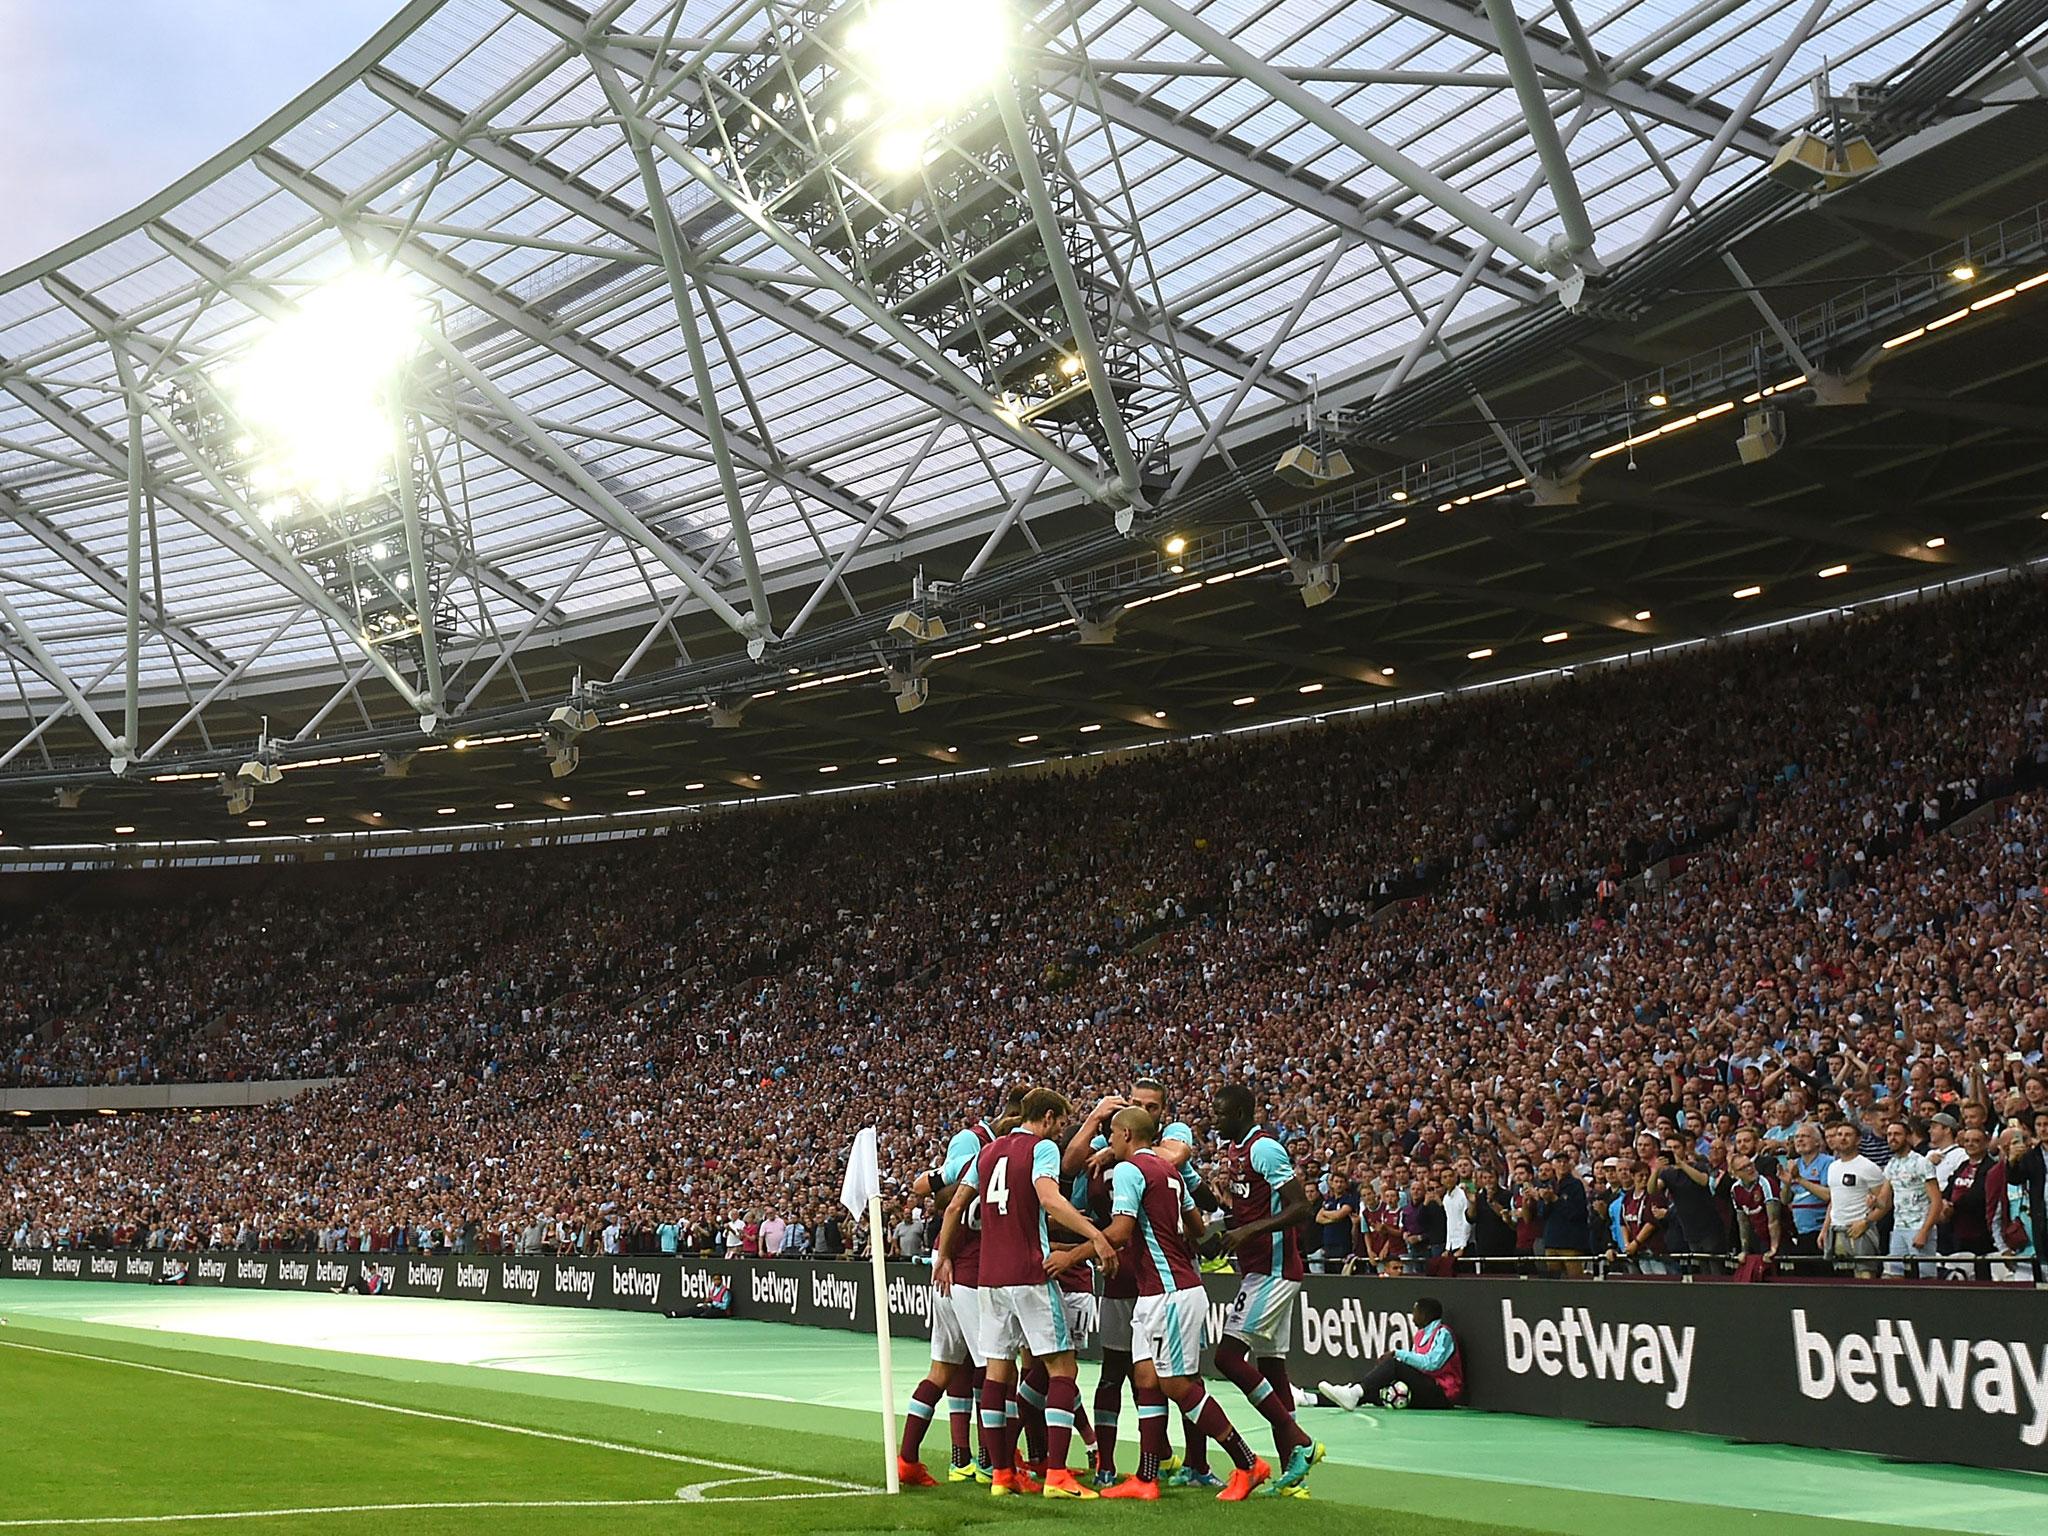 West Ham have rejected a £650m takeover offer from Red Bull, according to Jack Sullivan